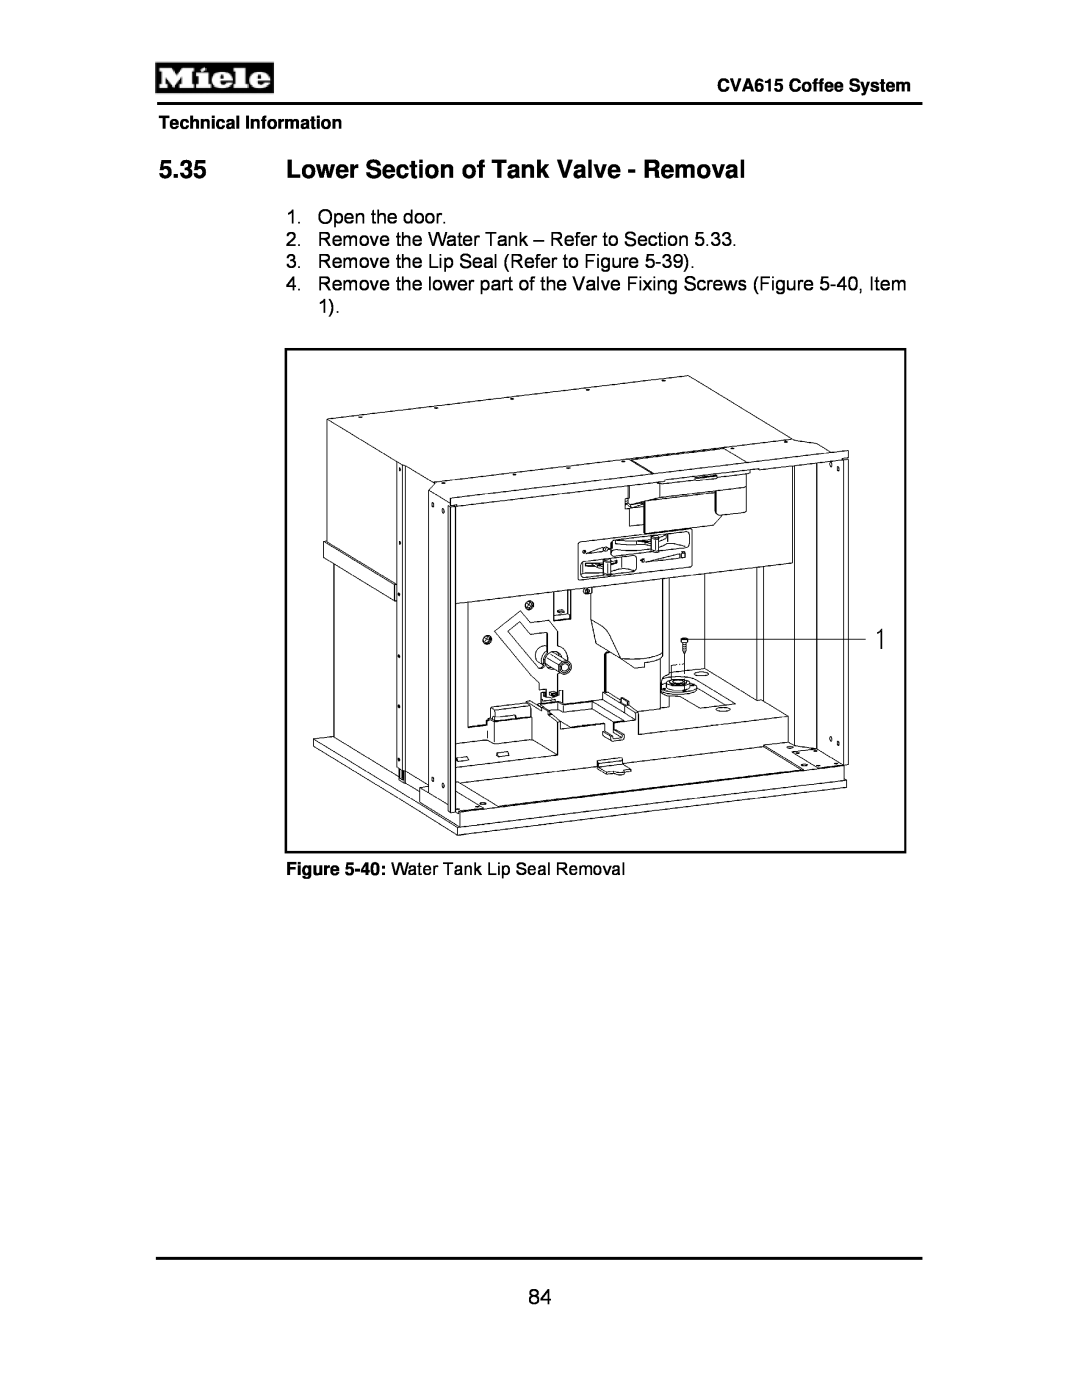 Miele CVA615 manual 5.35Lower Section of Tank Valve - Removal, Open the door, Remove the Water Tank – Refer to Section 